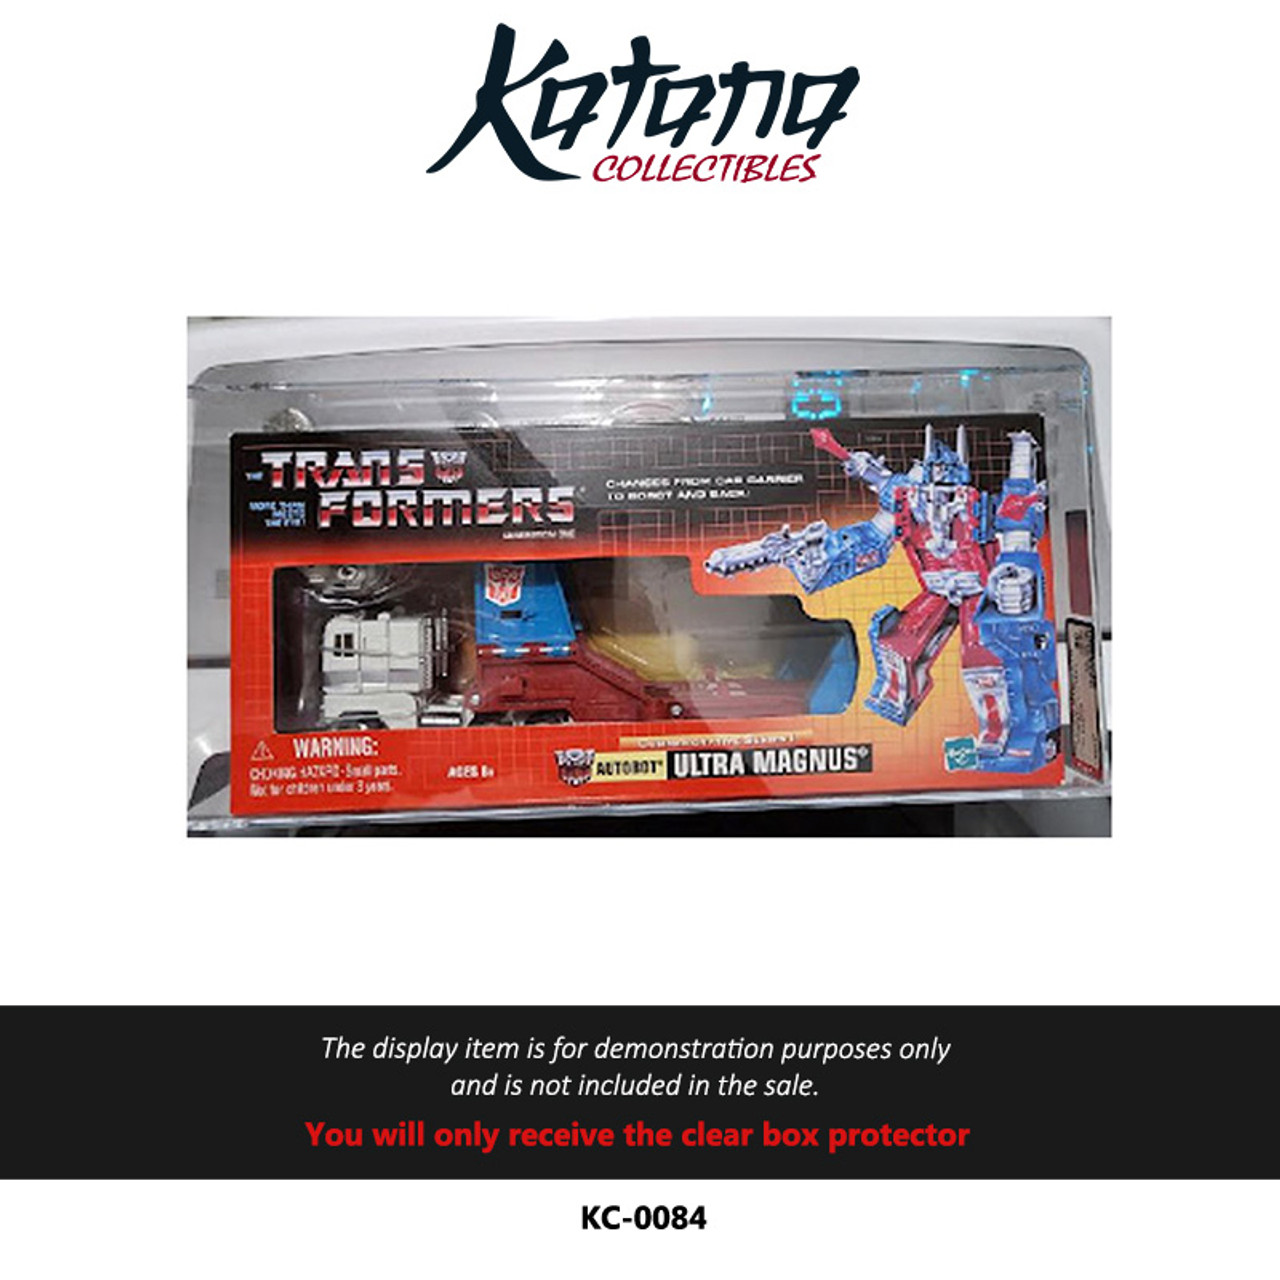 Katana Collectibles Protector For Transformers Commemorative Series 1 - Ultra Magnus (Graded/ Inside Acrylic Sealed Case)